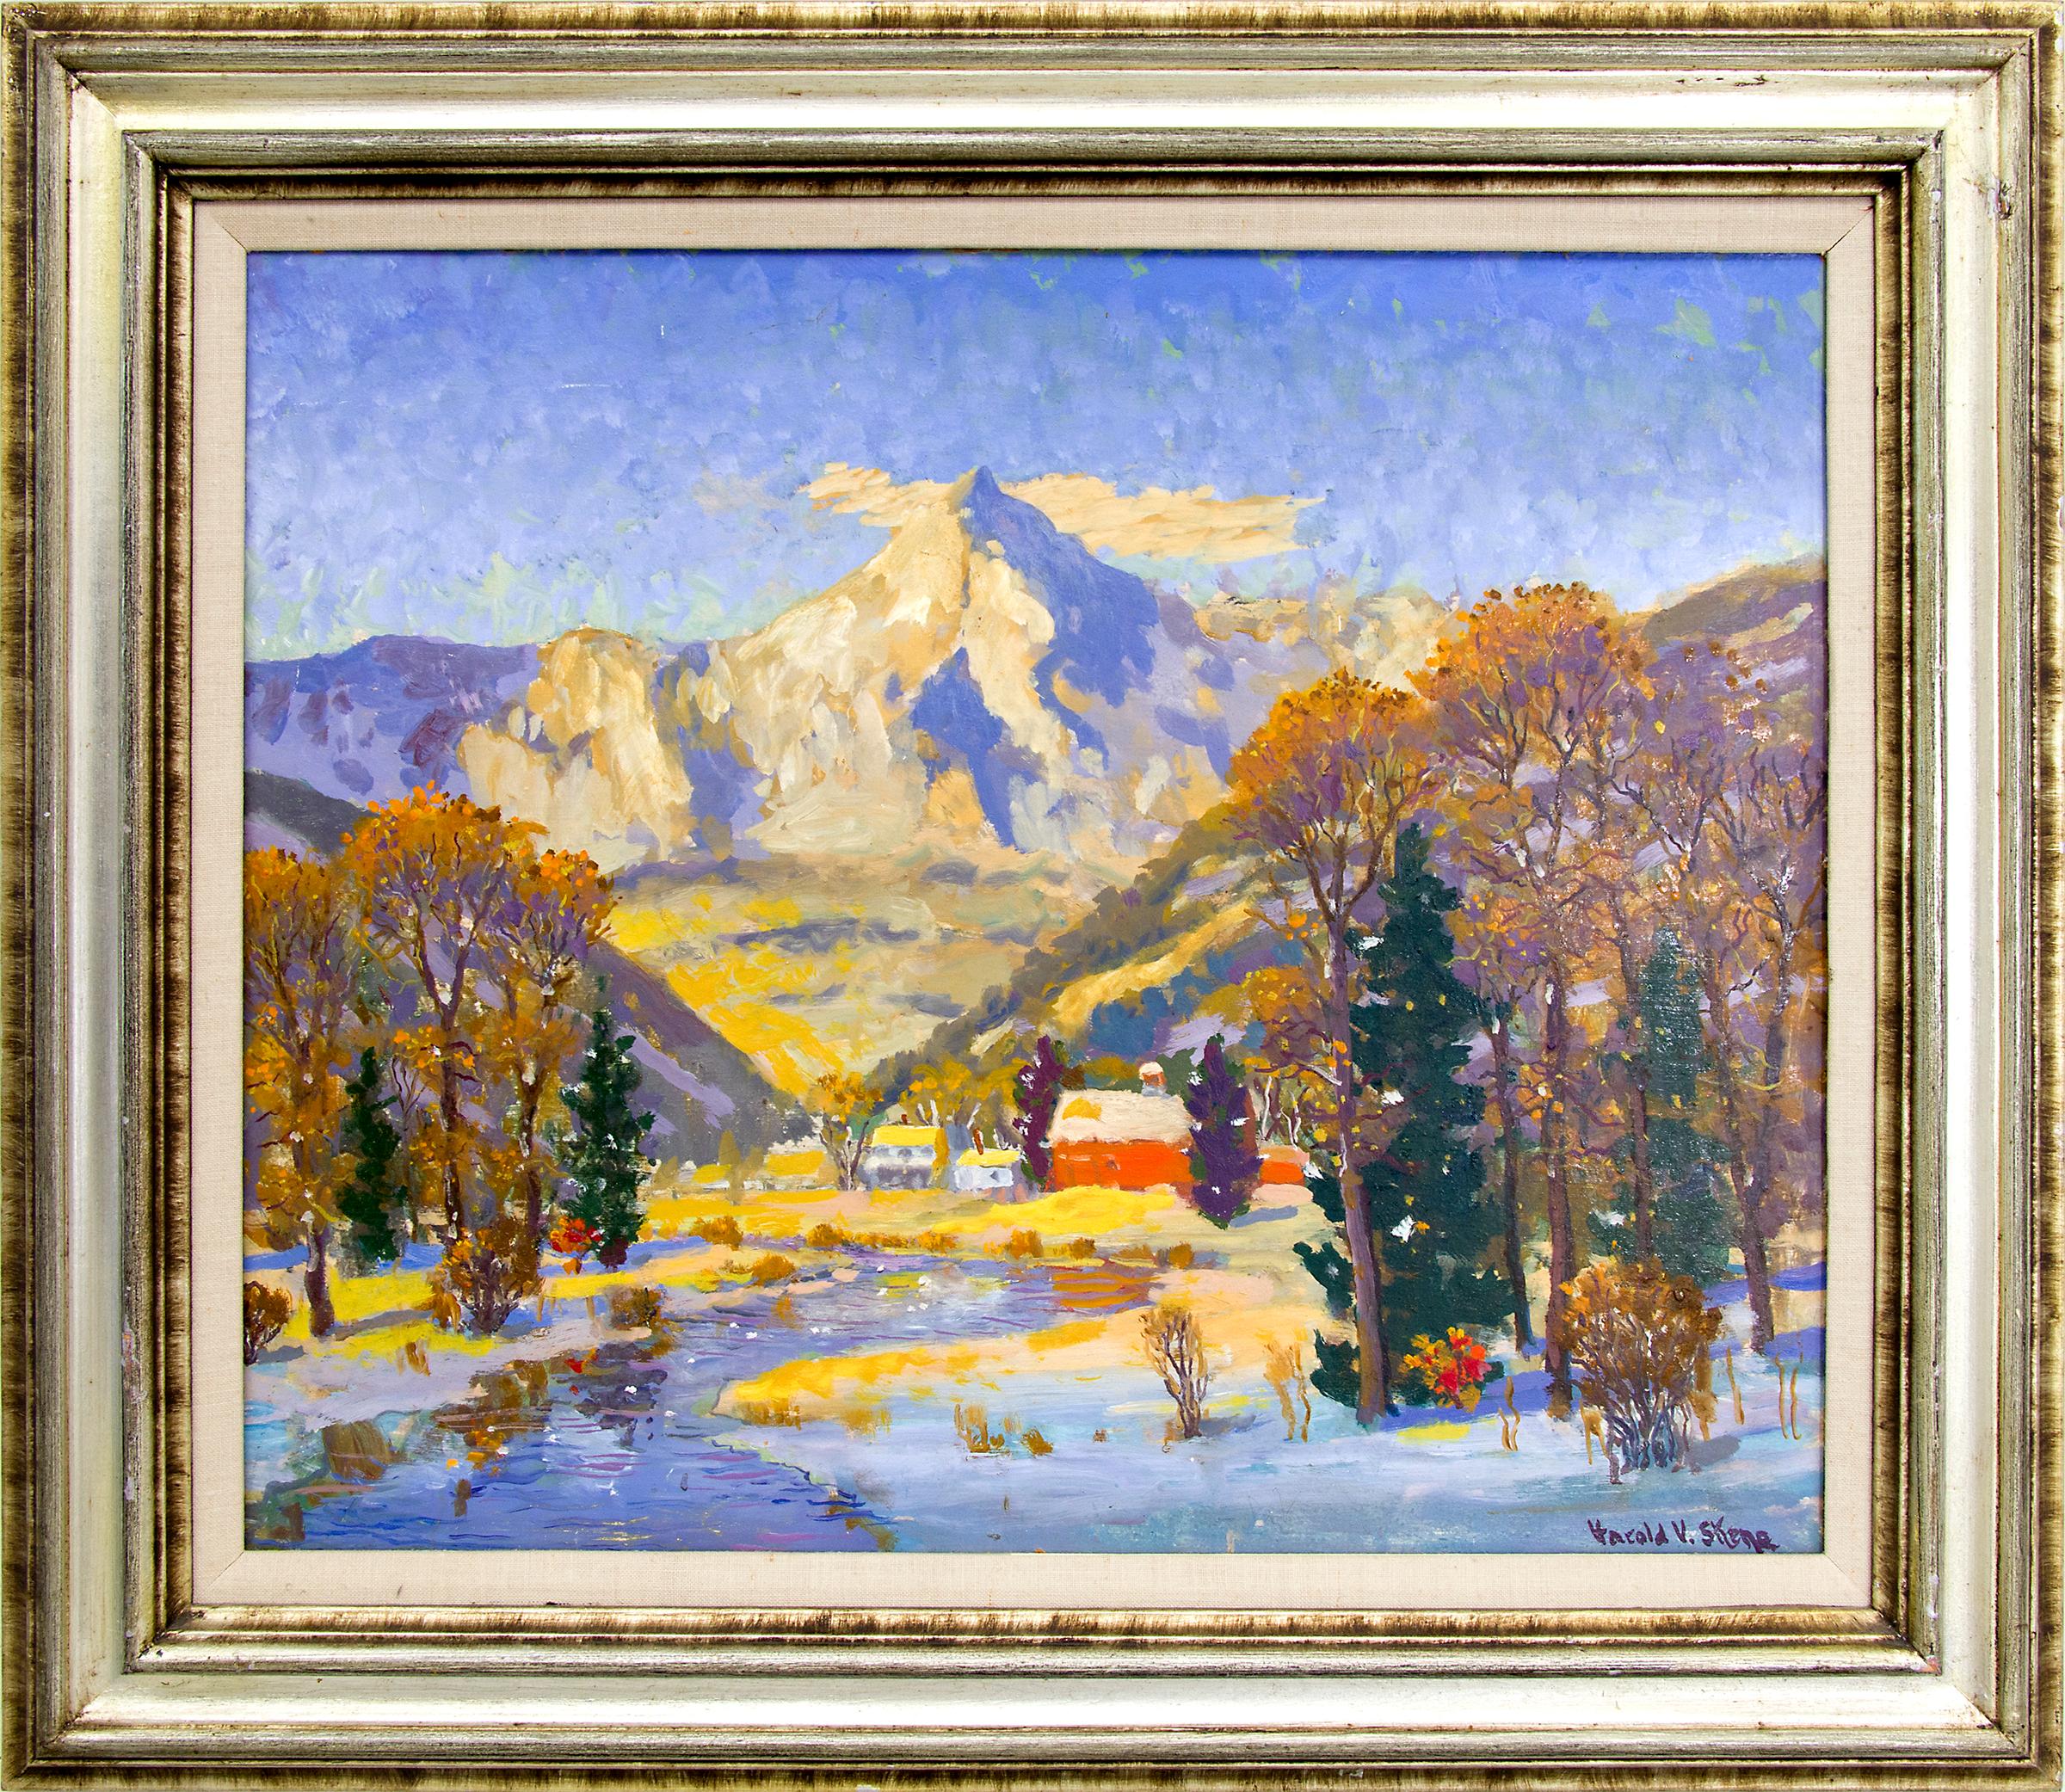 Harold Vincent Skene Landscape Painting - Colorado Winter (Snowy Mountain Landscape with a Creek and Ranch House & Barn)